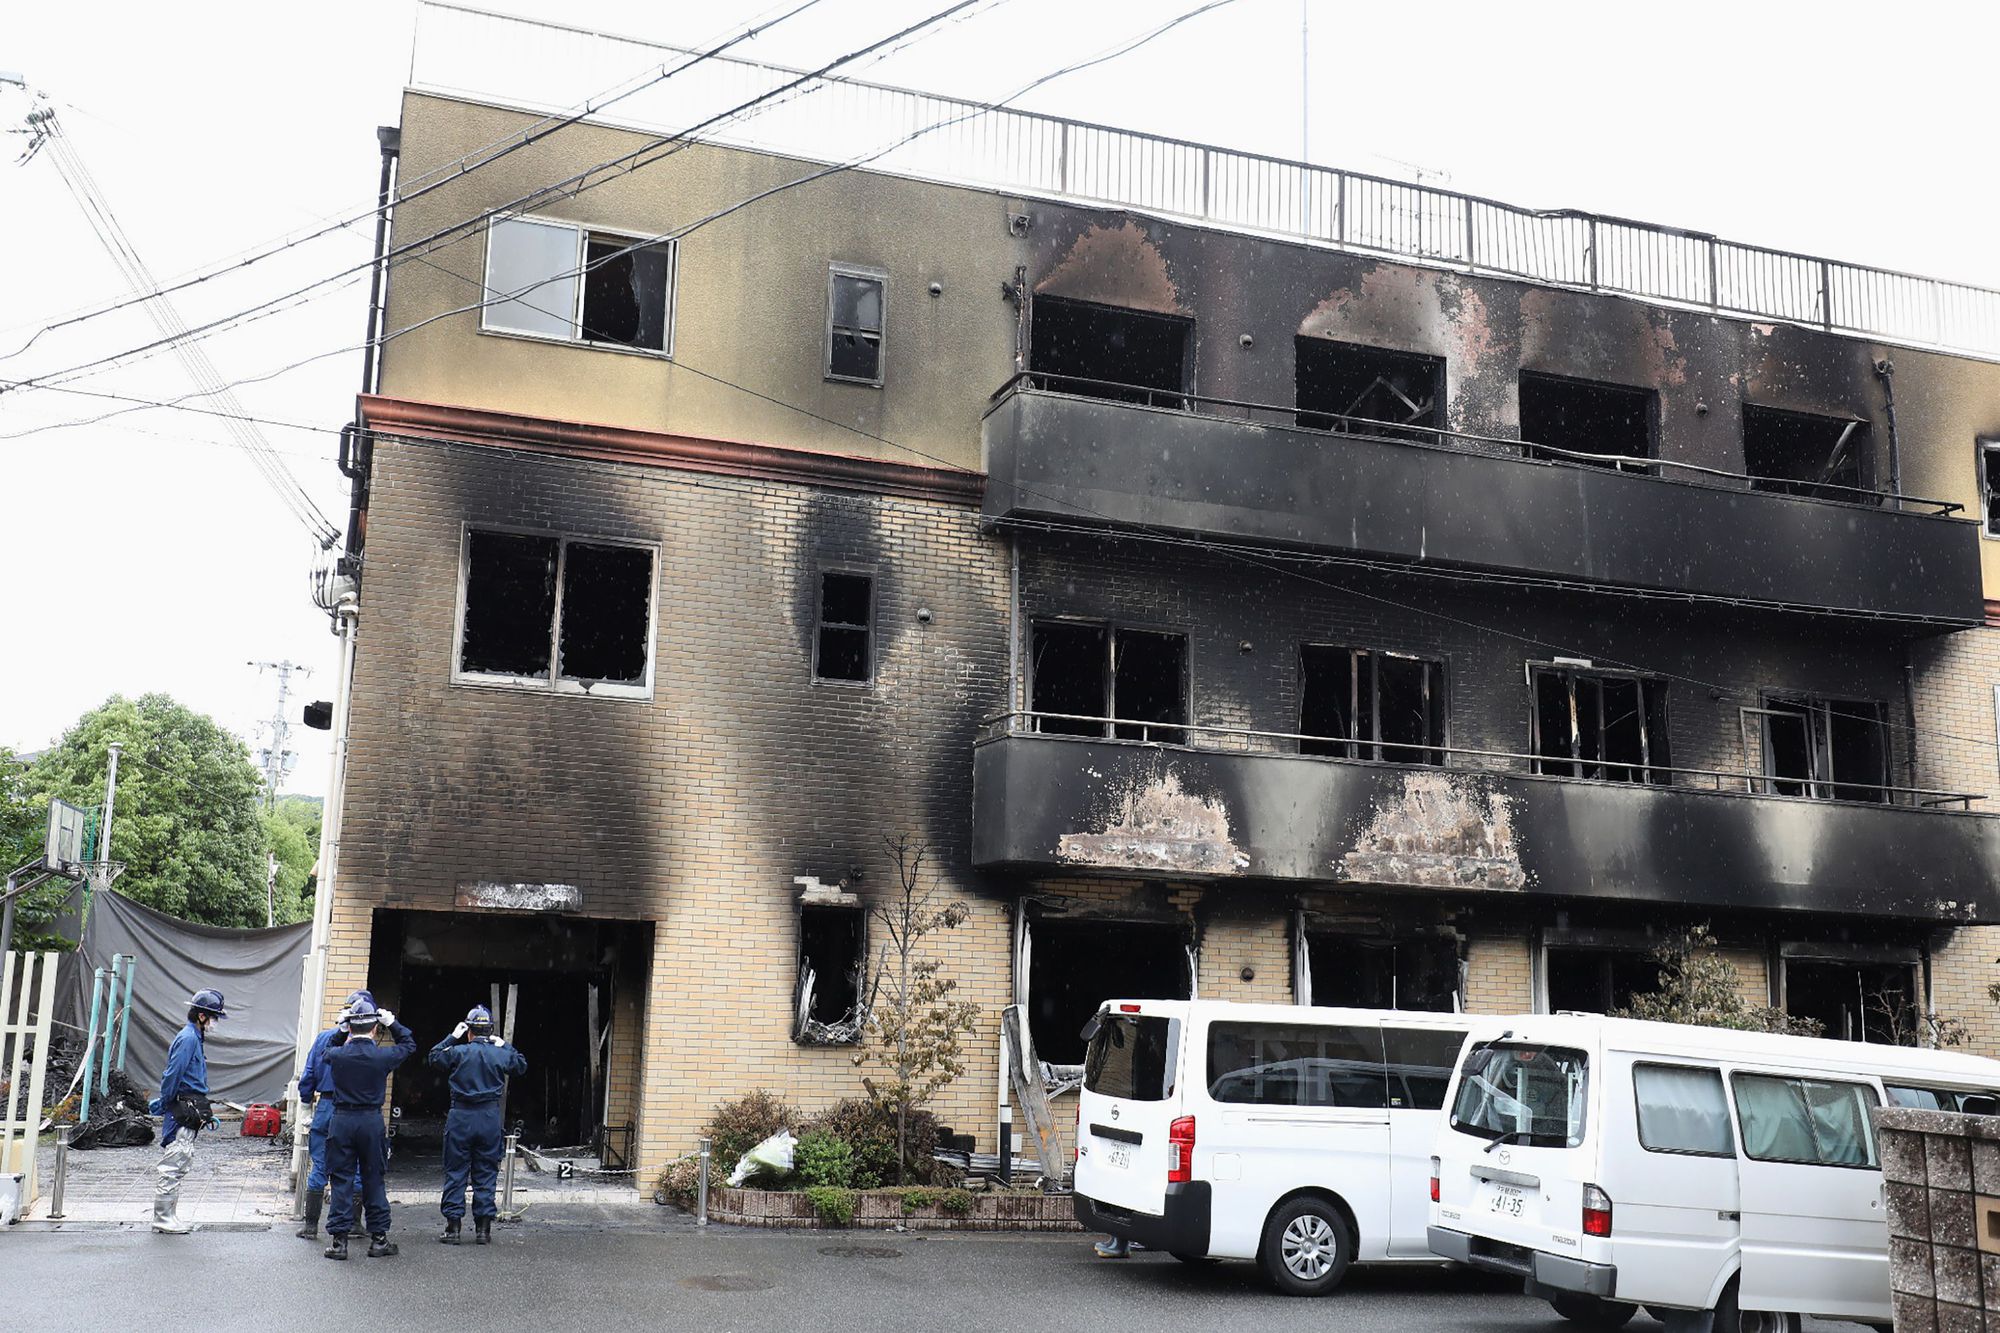 Go read this story about the arson attack at Kyoto Animation - The Verge